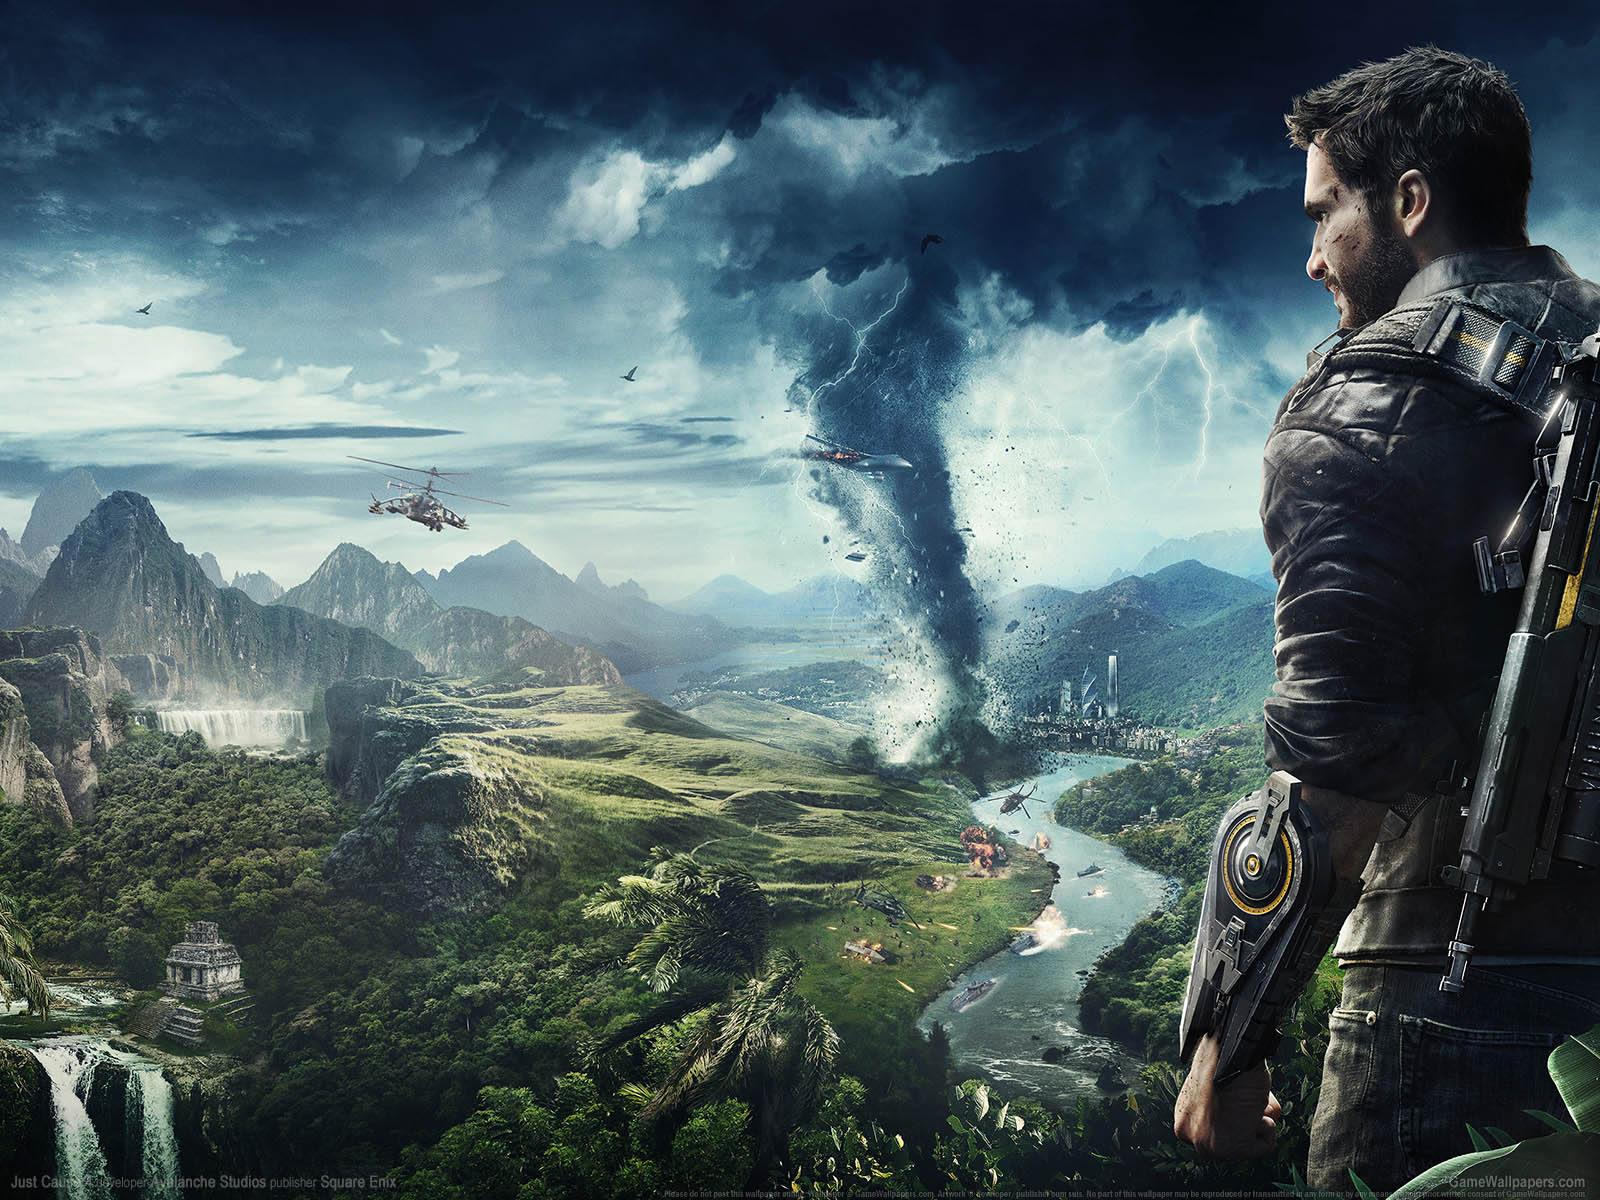 Just Cause 4νmmer=02 wallpaper  1600x1200